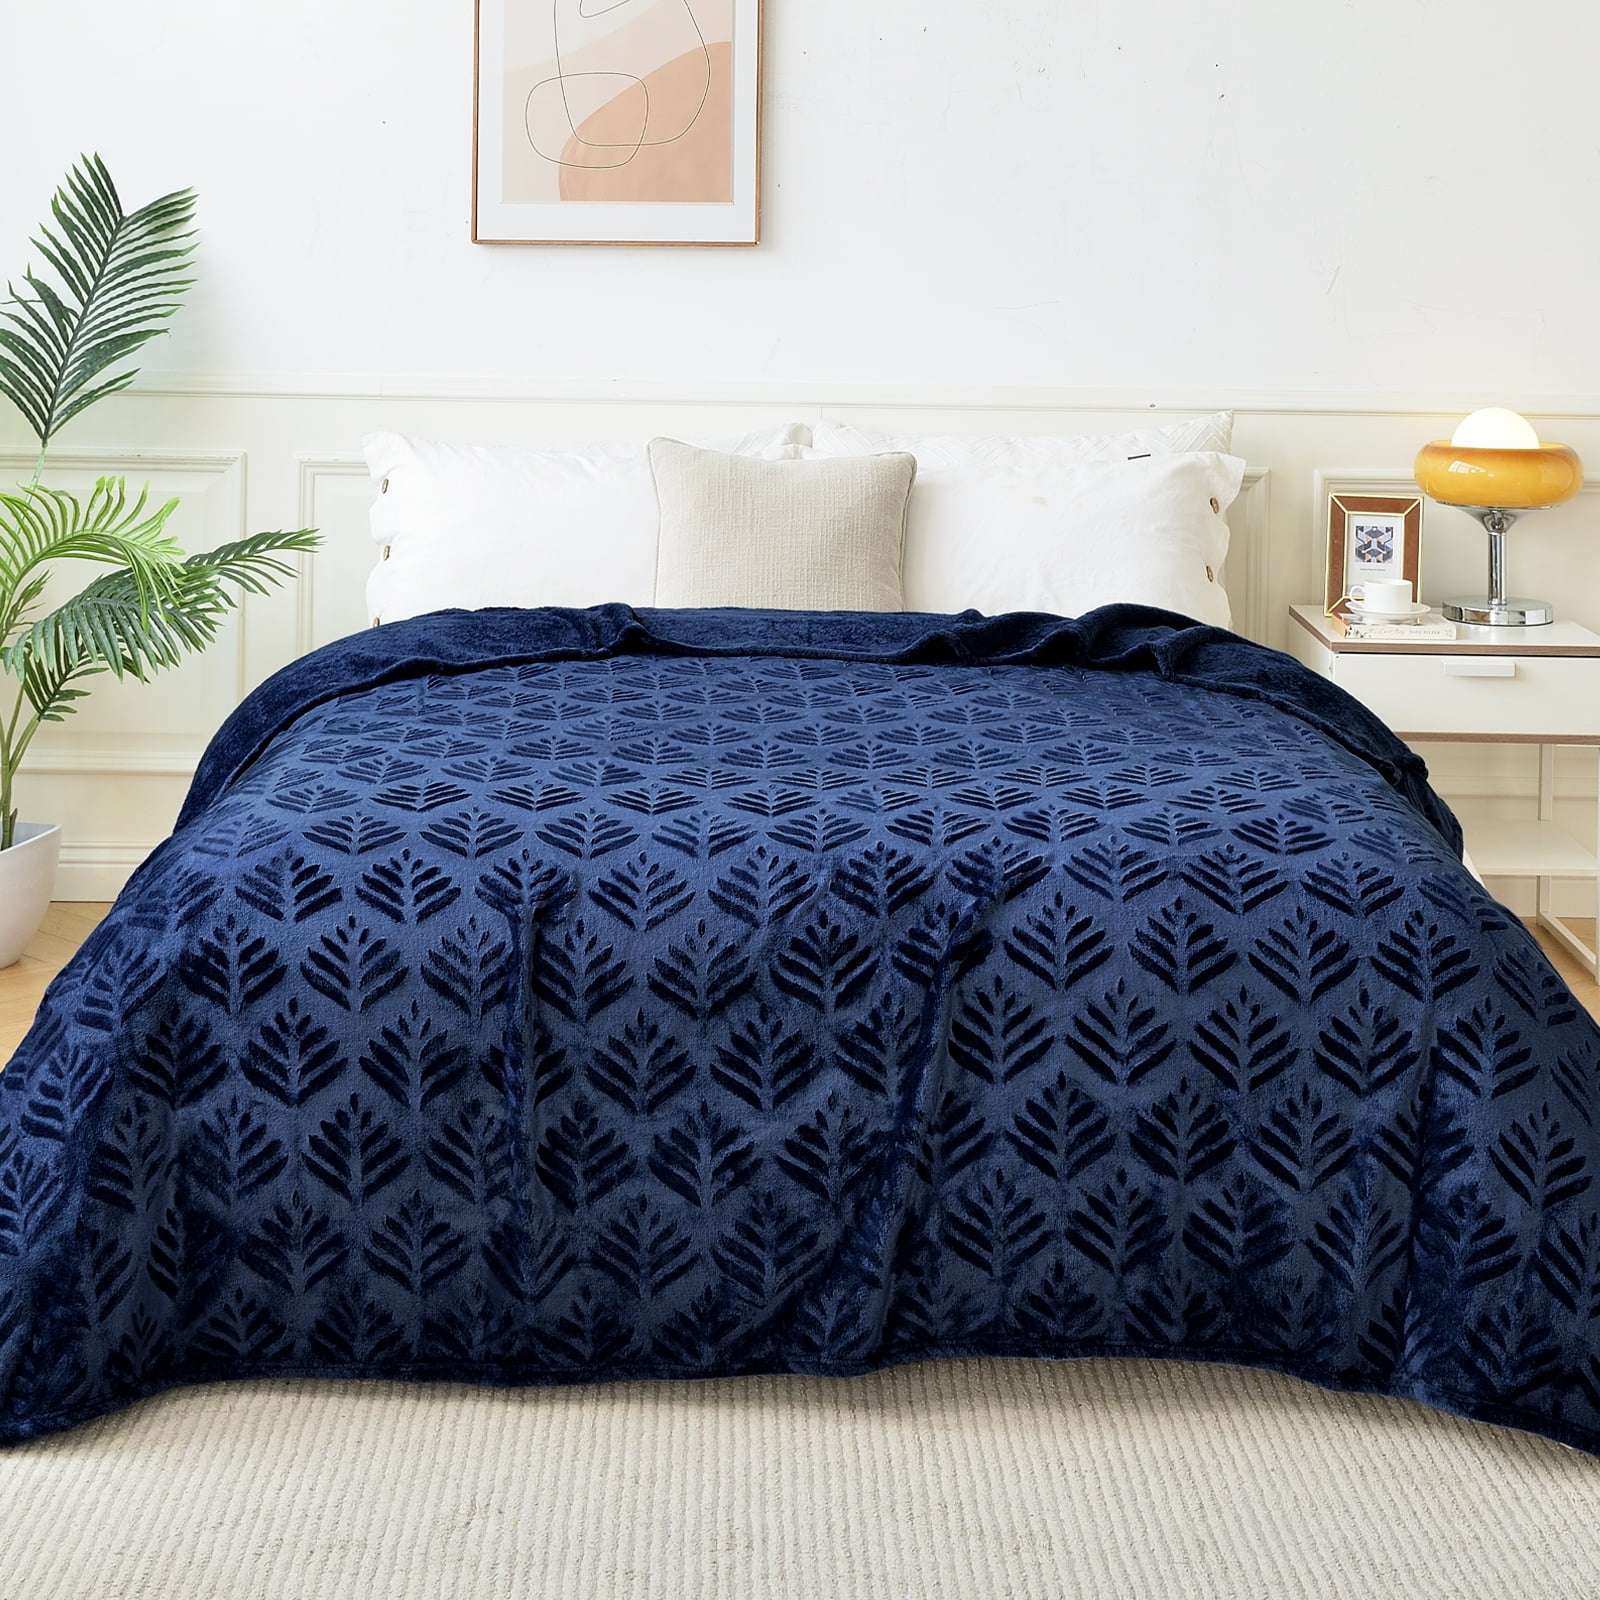 Exclusivo Mezcla Twin size Blanket for Bed, Super Soft and Warm Navy Blue Blankets for All Seasons, Flannel Fleece Leaves Pattern Bed Blanket, Plush Fuzzy and Thick, 60x80 Inch